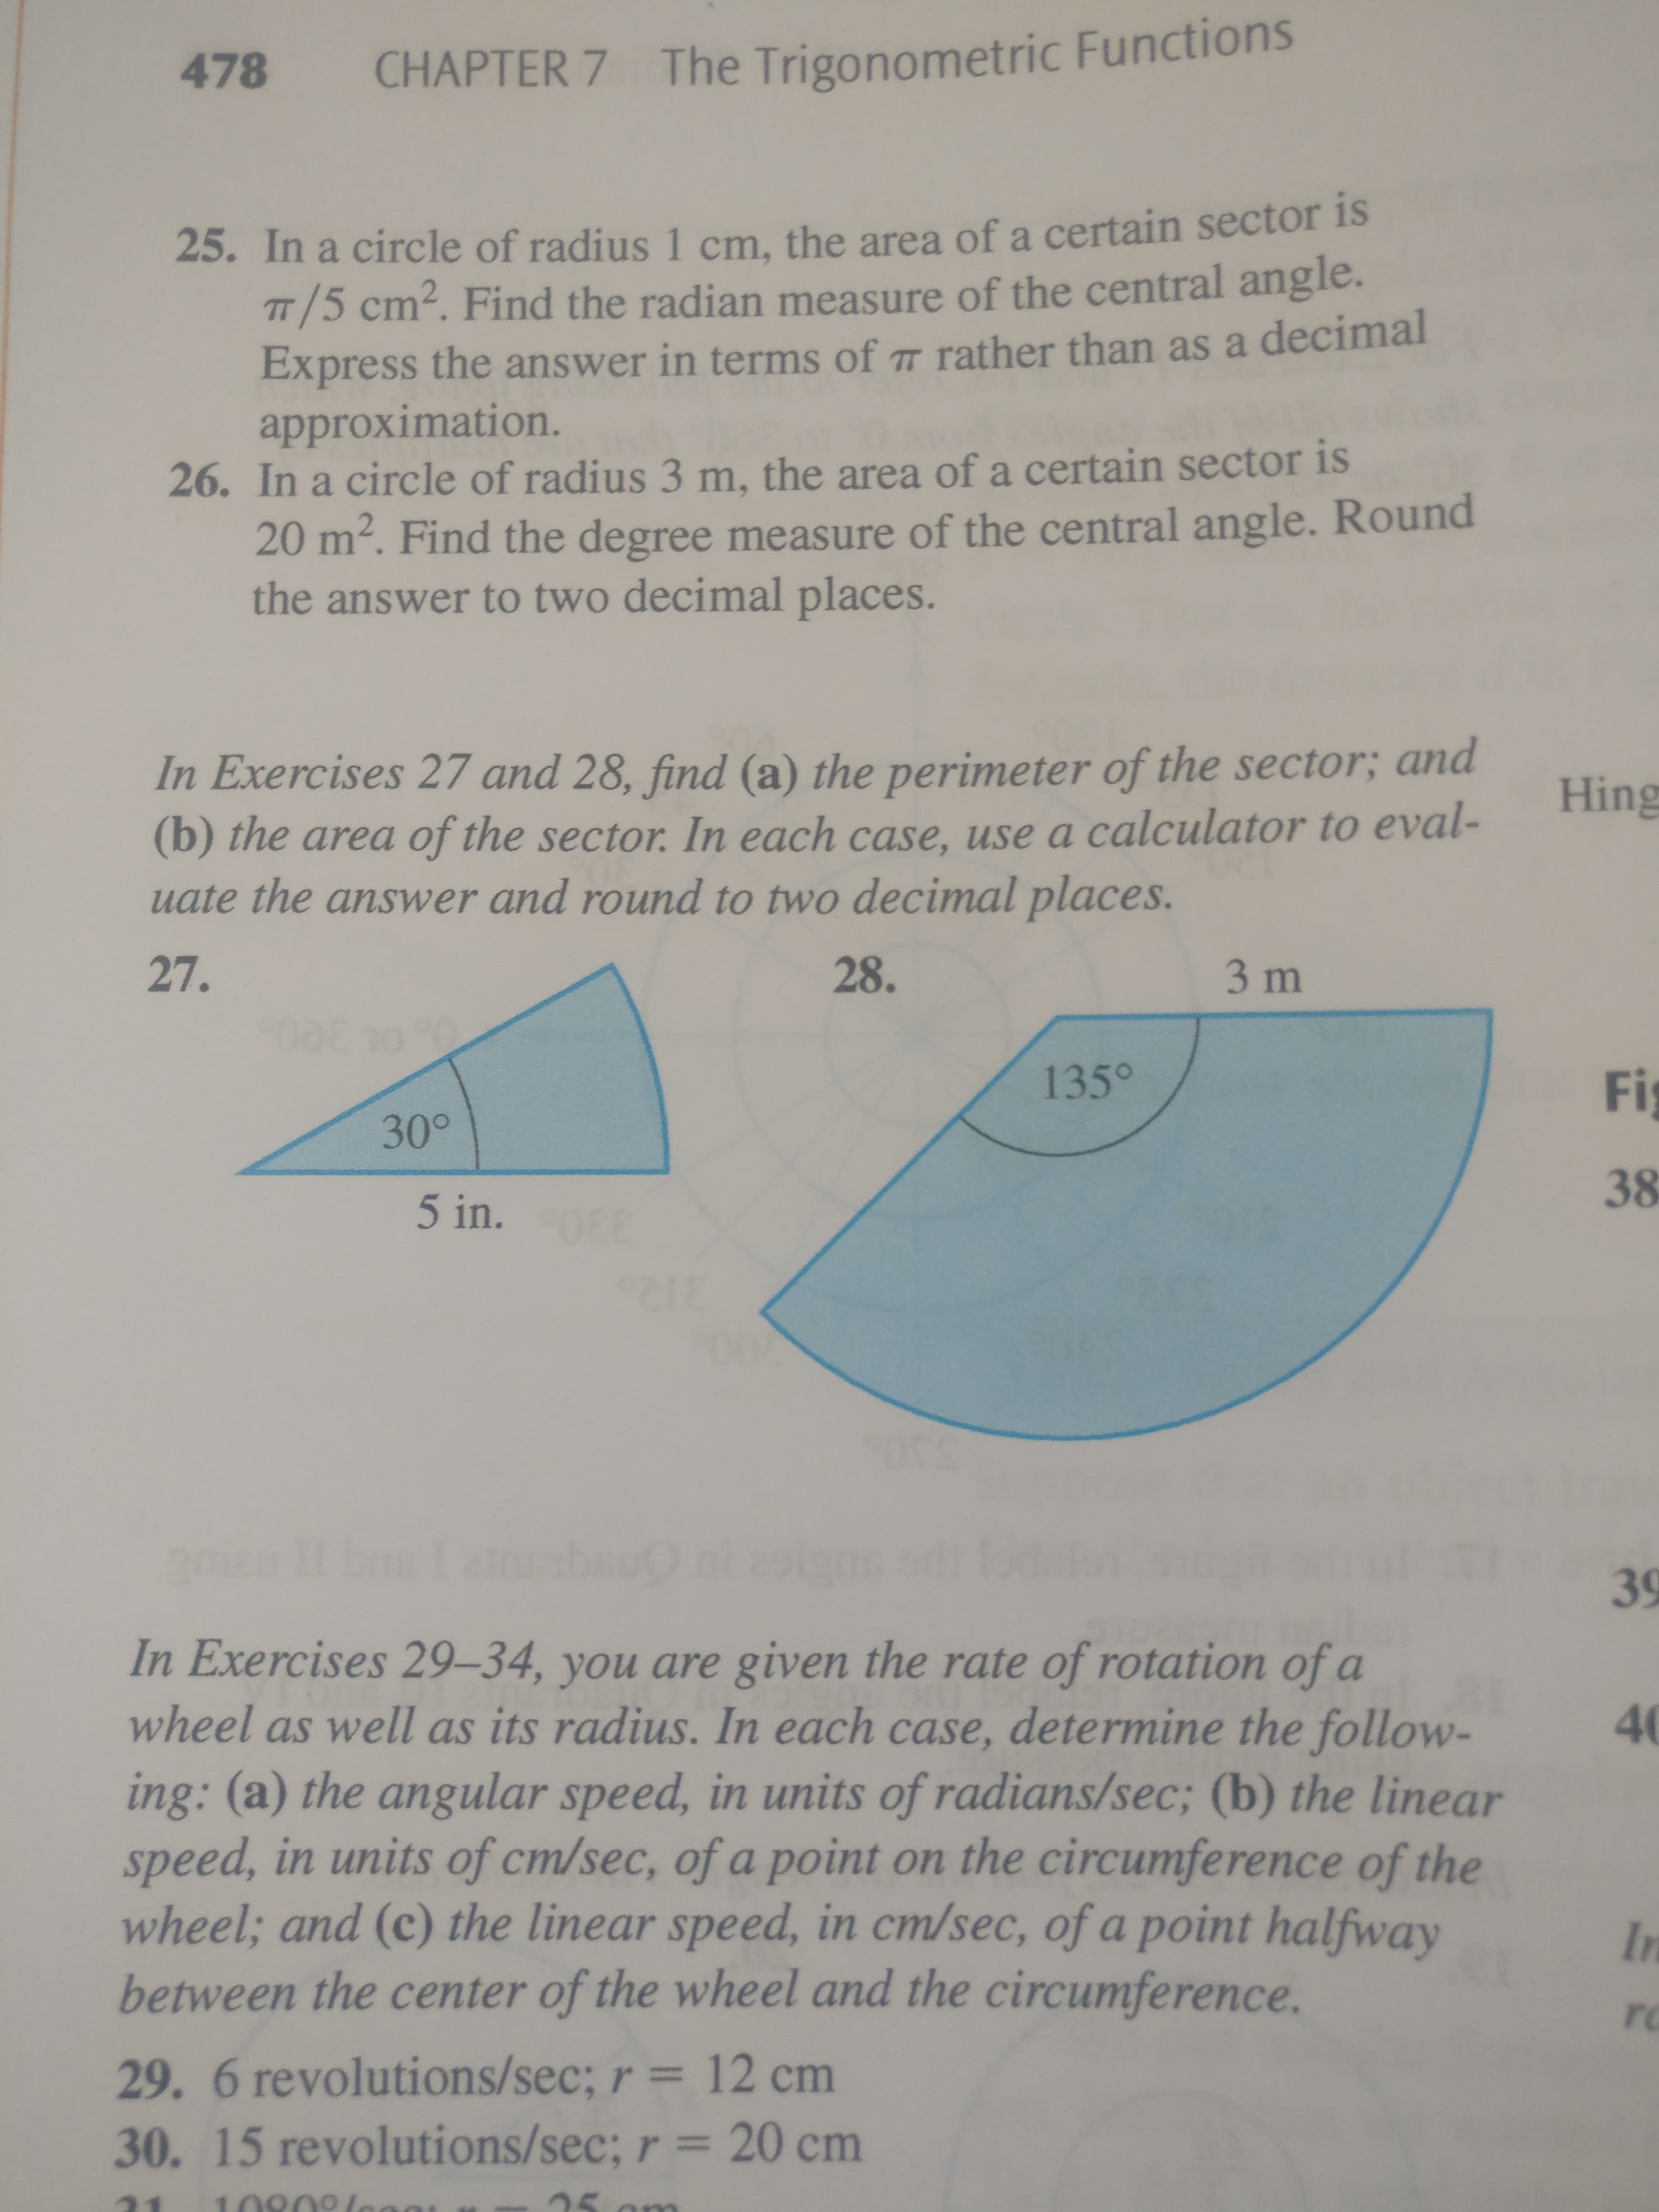 478
CHAPTER 7 The Trigonometric Functions
25. In a circle of radius 1 cm, the area of a certain sector is
TT/5 cm². Find the radian measure of the central angle.
Express the answer in terms of 7 rather than as a decimal
approximation.
26. In a circle of radius 3 m, the area of a certain sector is
20 m². Find the degree measure of the central angle. Round
the answer to two decimal places.
In Exercises 27 and 28, find (a) the perimeter of the sector; and
Hing
(b) the area of the sector. In each case, use a calculator to eval-
uate the answer and round to two decimal places.
27.
28.
3 m
135°
Fi
30°
38
5 in.
00
39
In Exercises 29–34, you are given the rate of rotation of a
wheel as well as its radius. In each case, determine the follow-
40
ing: (a) the angular speed, in units of radians/sec; (b) the linear
speed, in units of cm/sec, of a point on the circumference of the
wheel; and (c) the linear speed, in cm/sec, of a point halfway
between the center of the wheel and the circumference.
In
ro
29. 6 revolutions/sec; r = 12 cm
30. 15 revolutions/sec; r = 20 cm
10909lene
